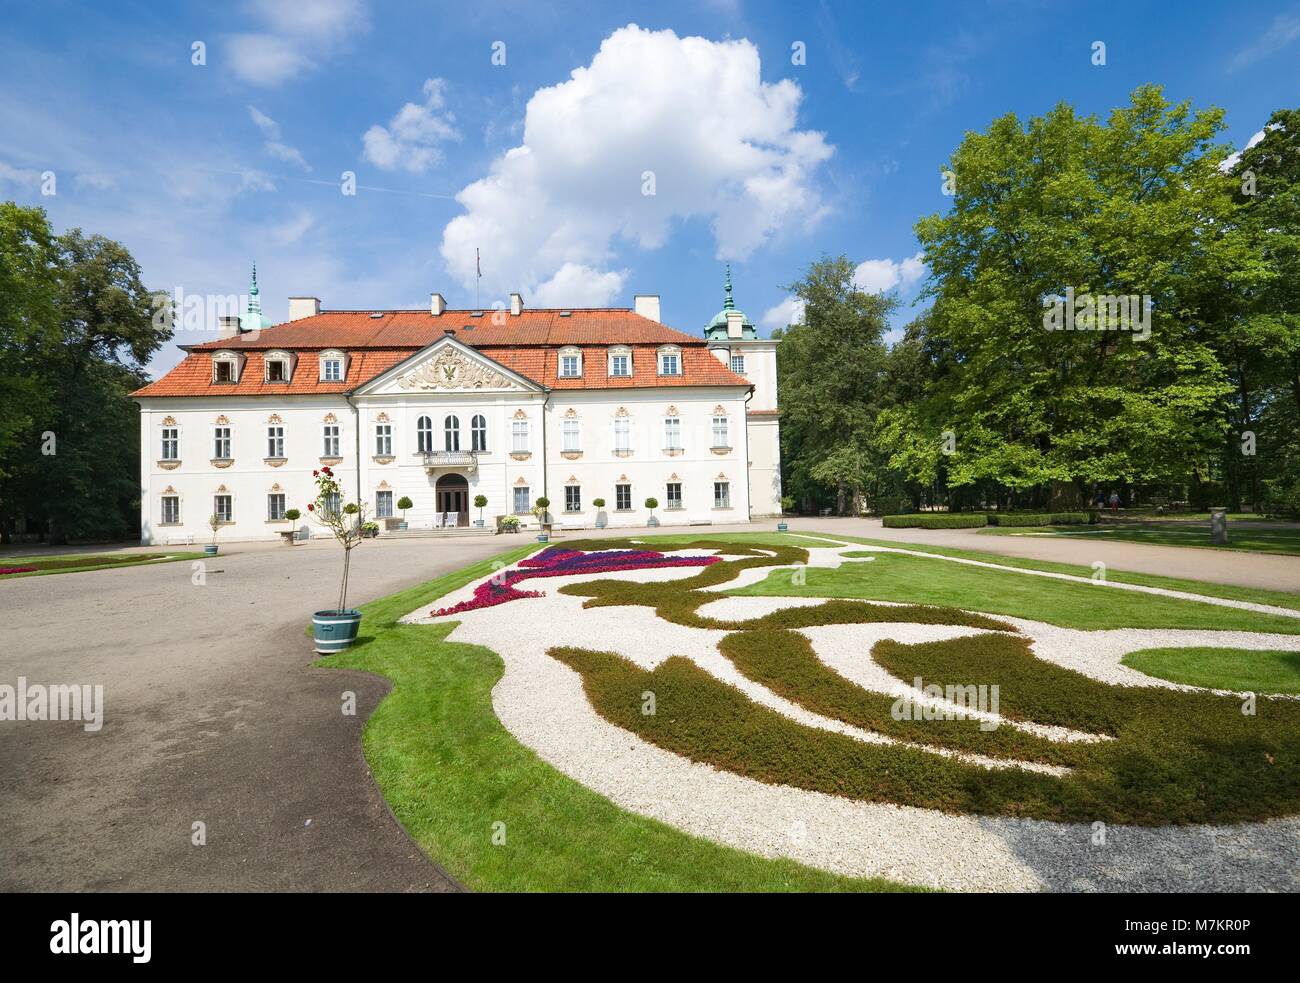 NIEBOROW, POLAND - AUGUST 20: Aristocratic Baroque palace surrounded by a French-style garden on August 20, 2016 in Nieborow, Poland Stock Photo